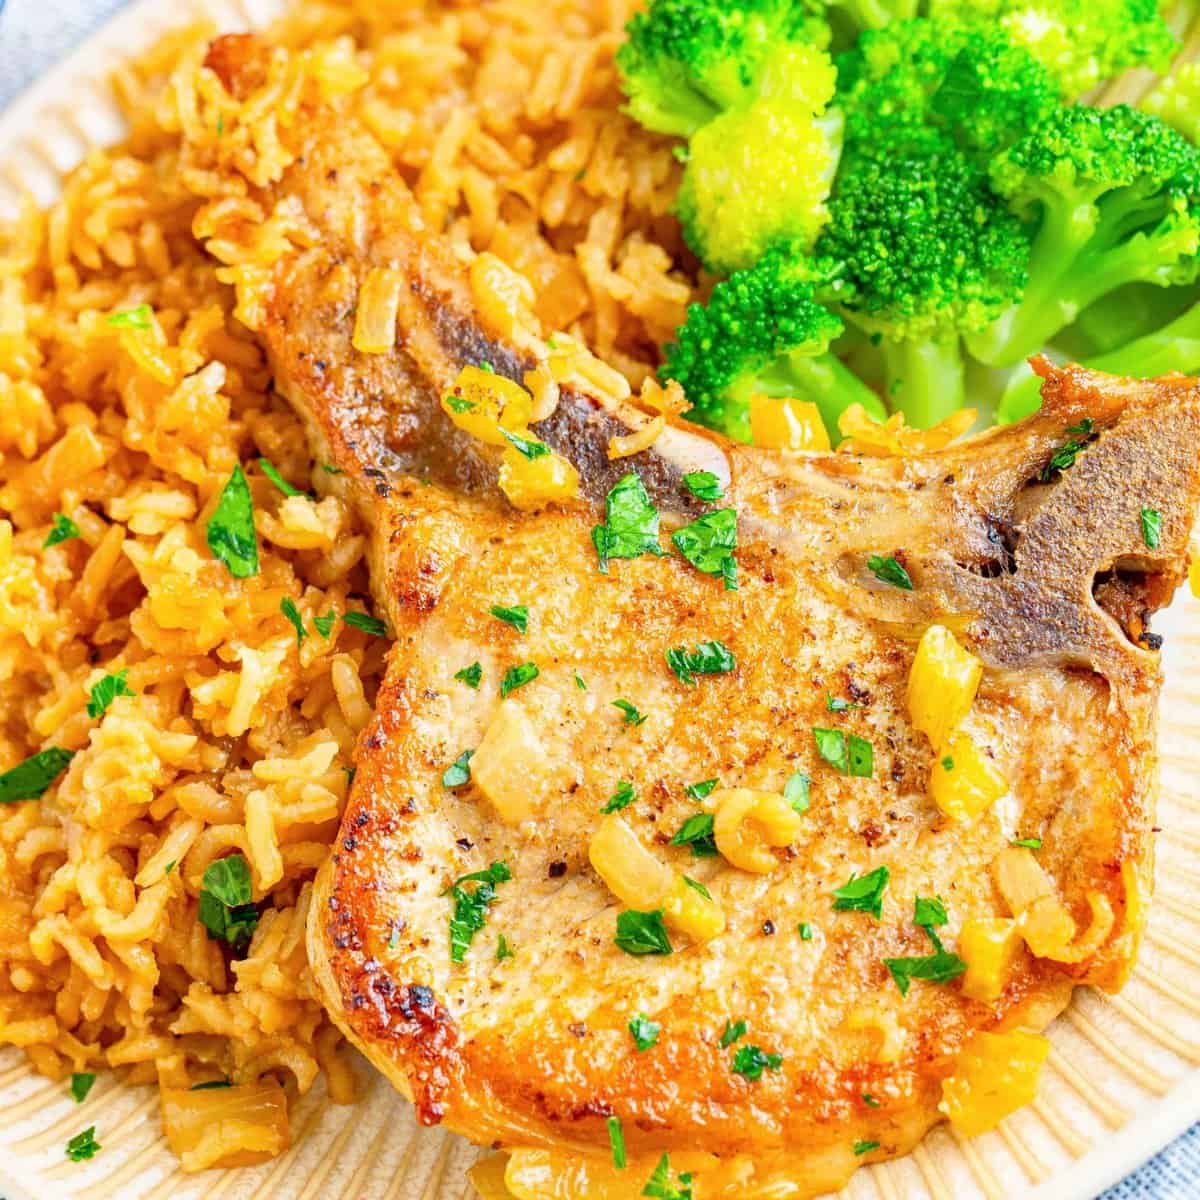 Baked Pork Chop and Rice